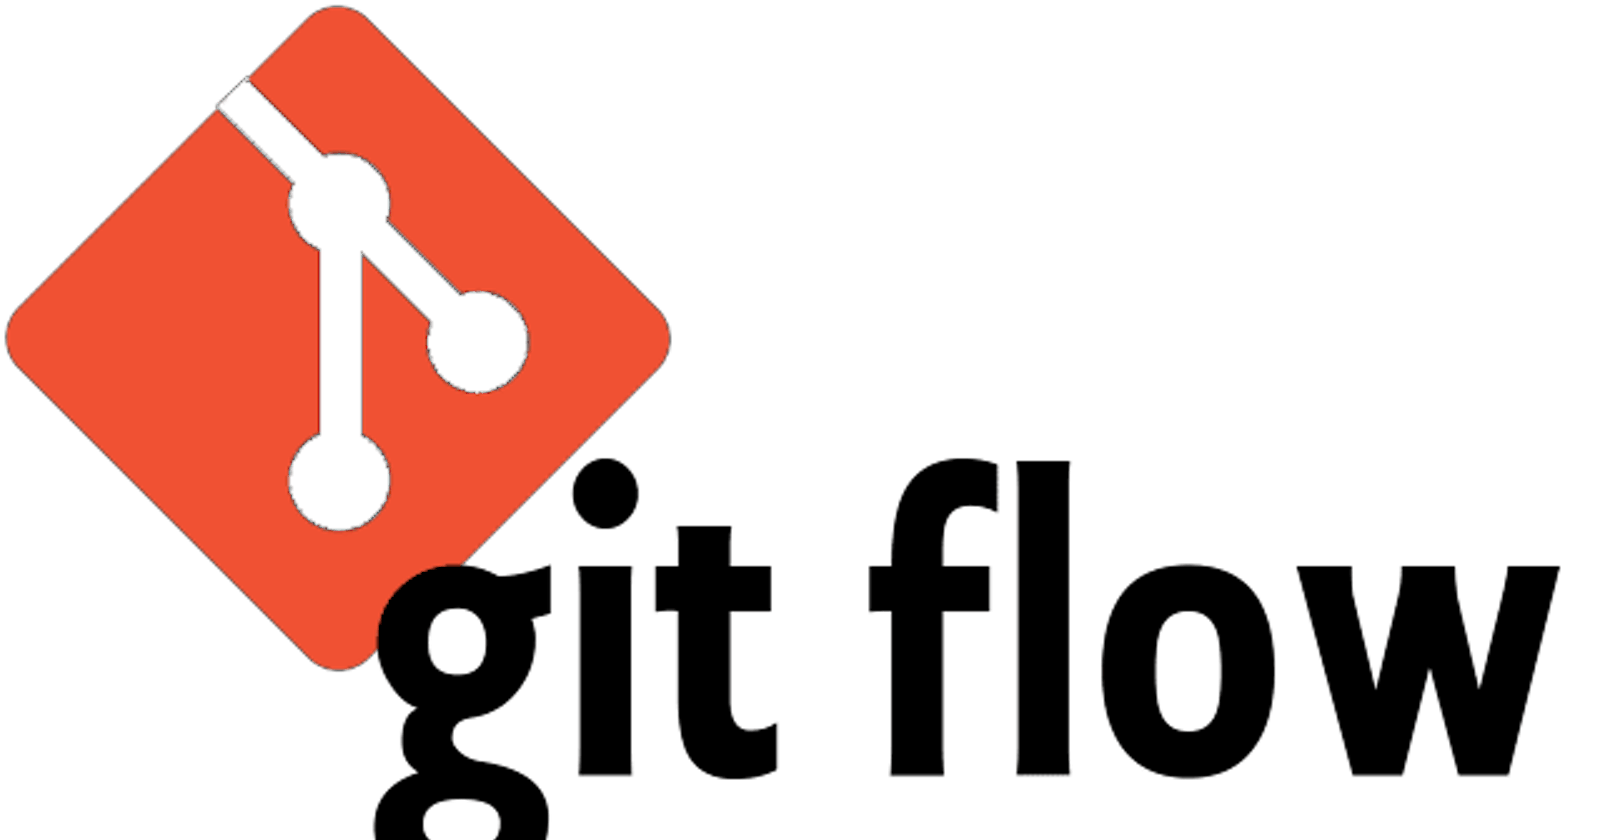 One of the best practices about Git-flow